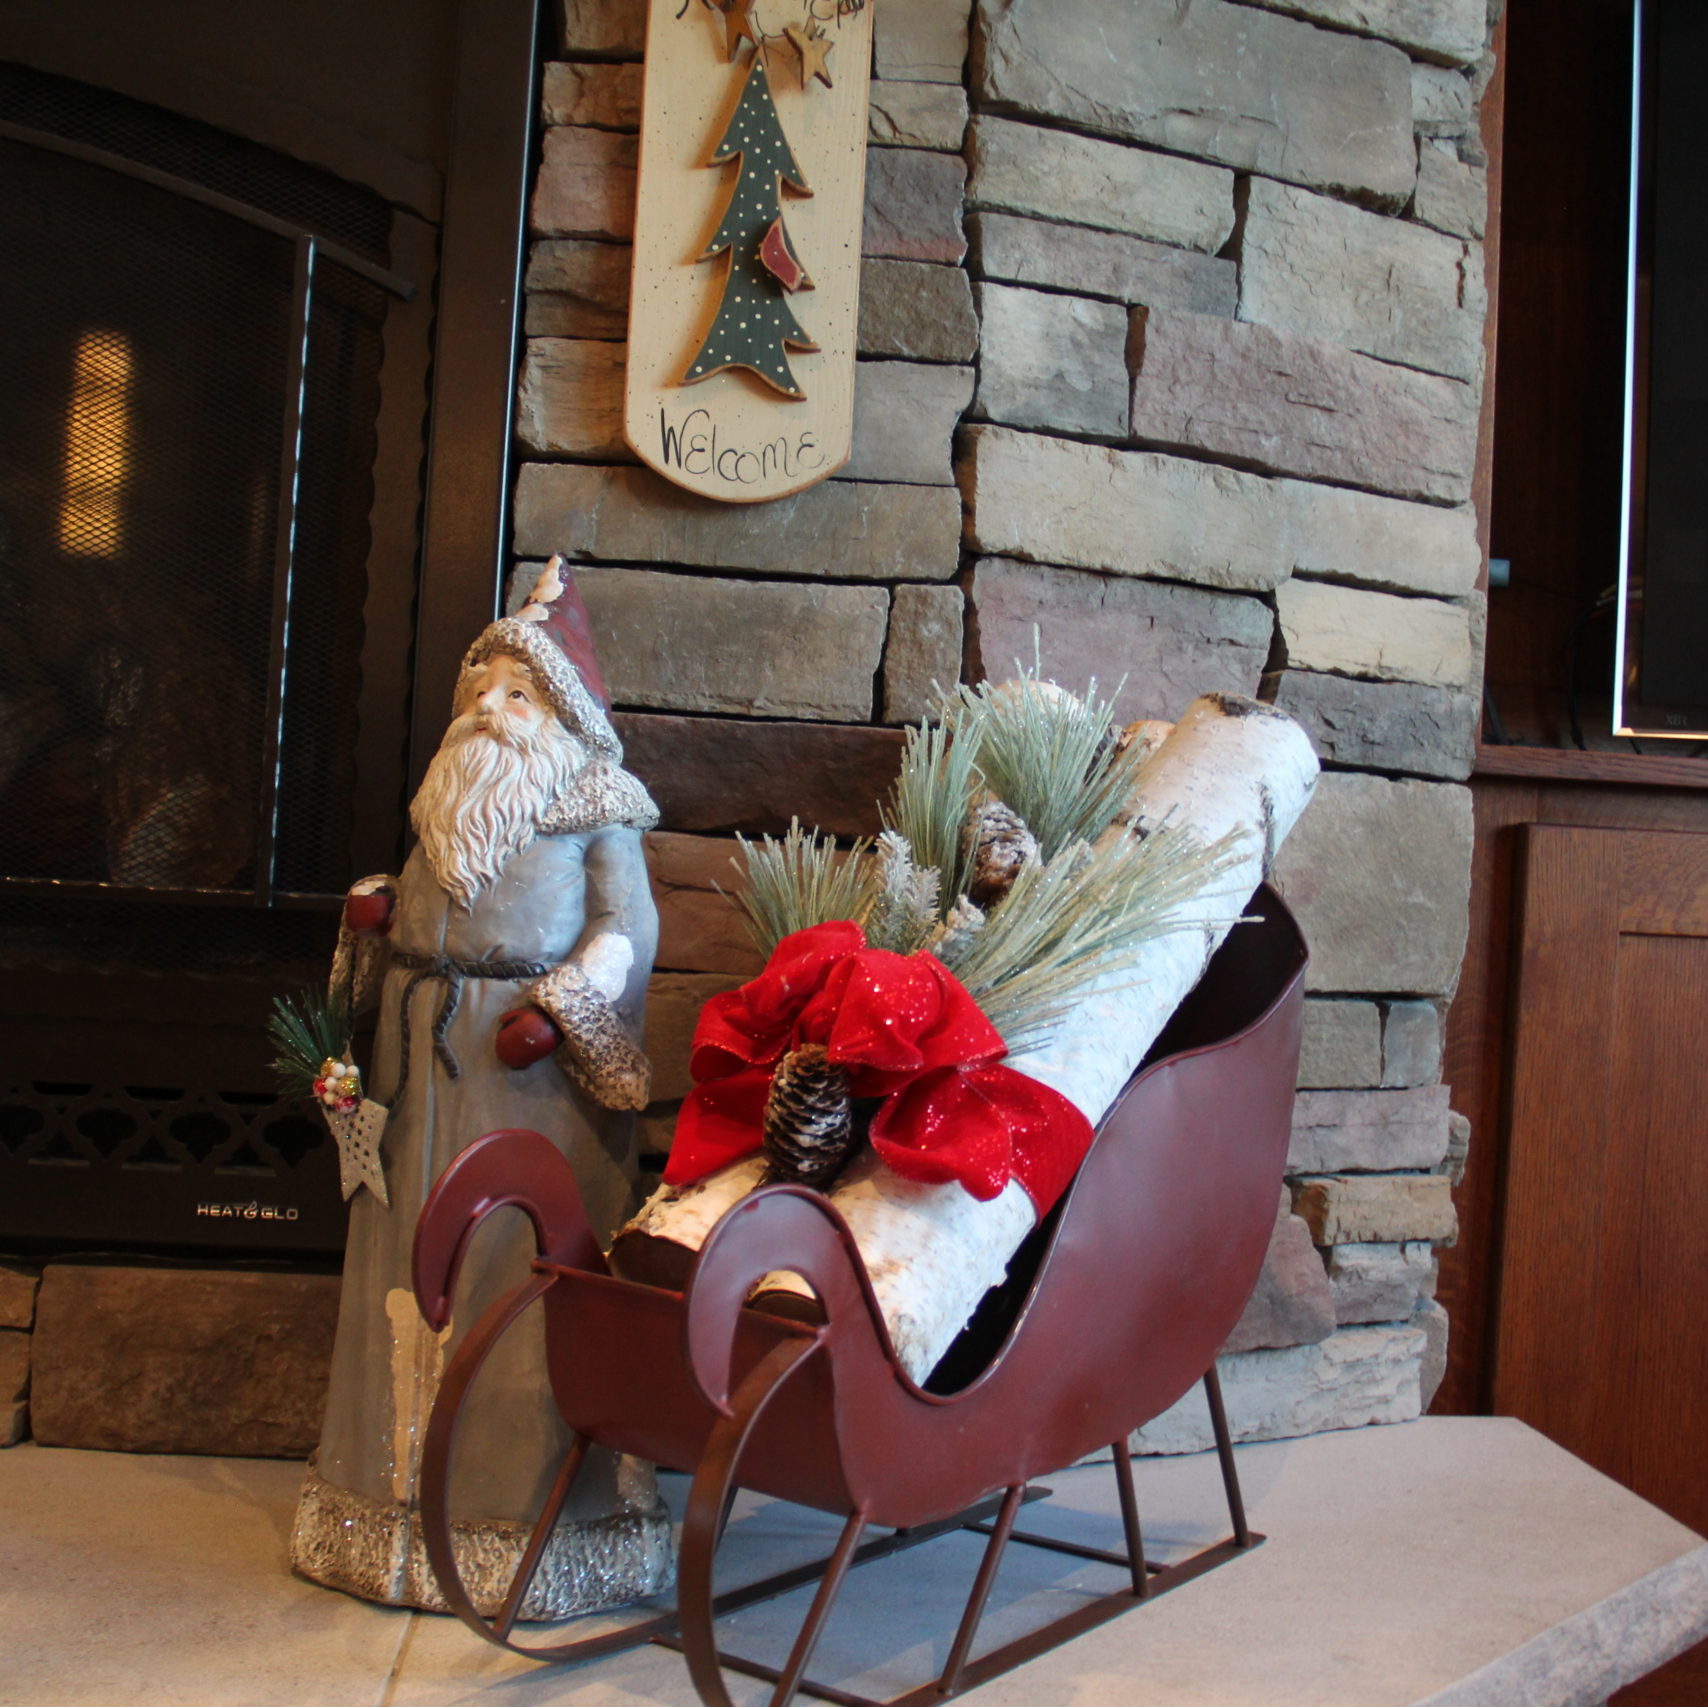 On the hearth I choose a nice tall Santa from a shop in Galena. The sleigh is Pottery Barn and the birch logs from the floral shop in town. I added a greenery stick in frosty pine with a bright red velvet ribbon.